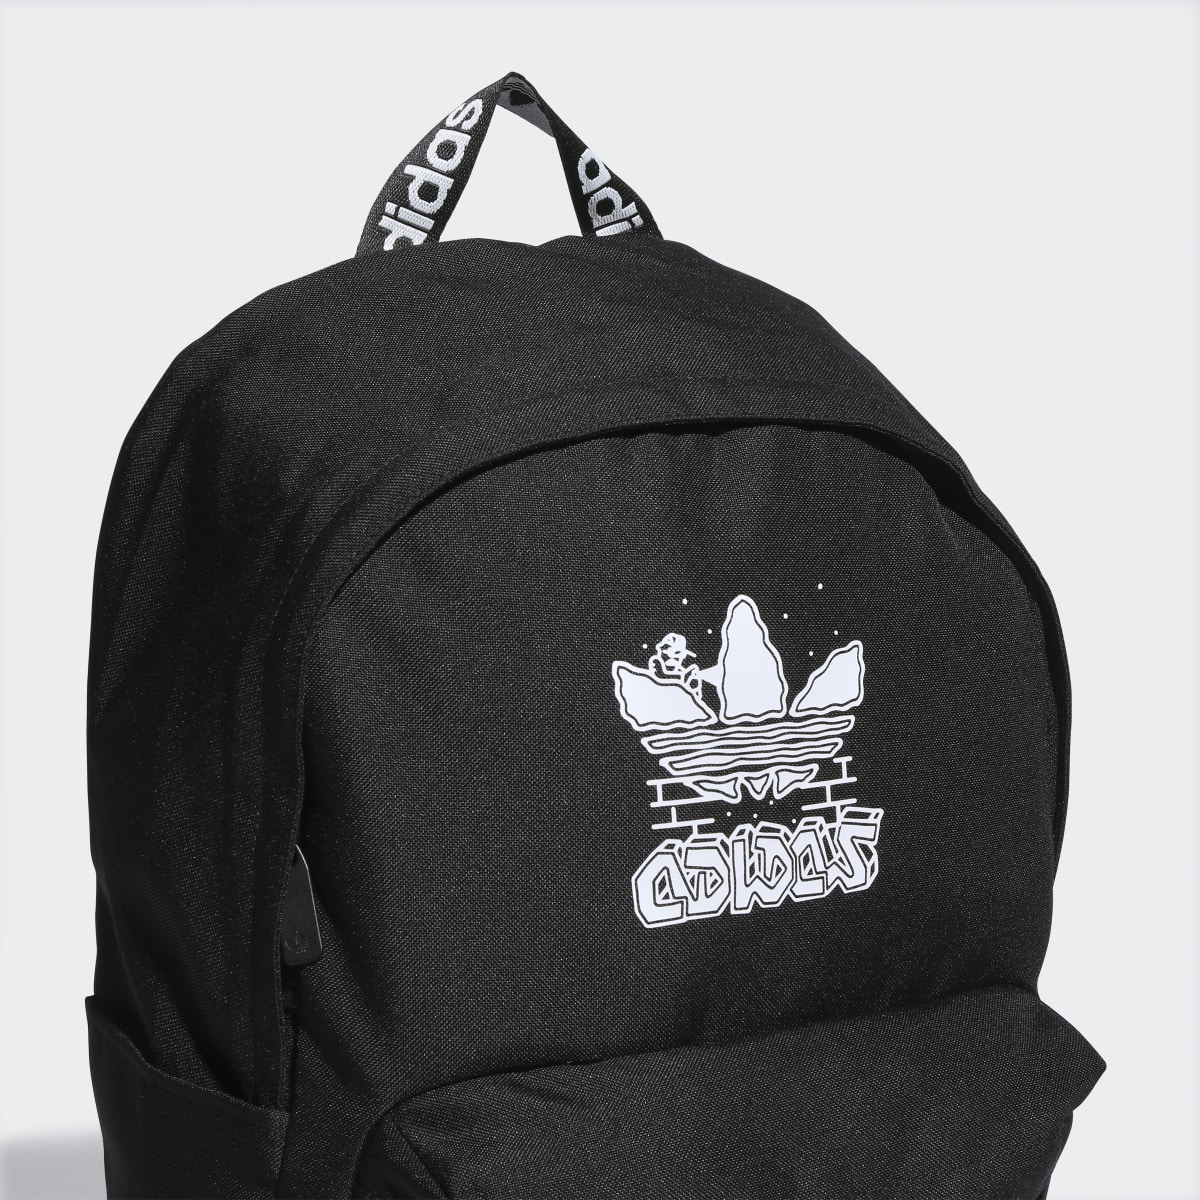 Adidas Trefoil Classic Backpack. 7